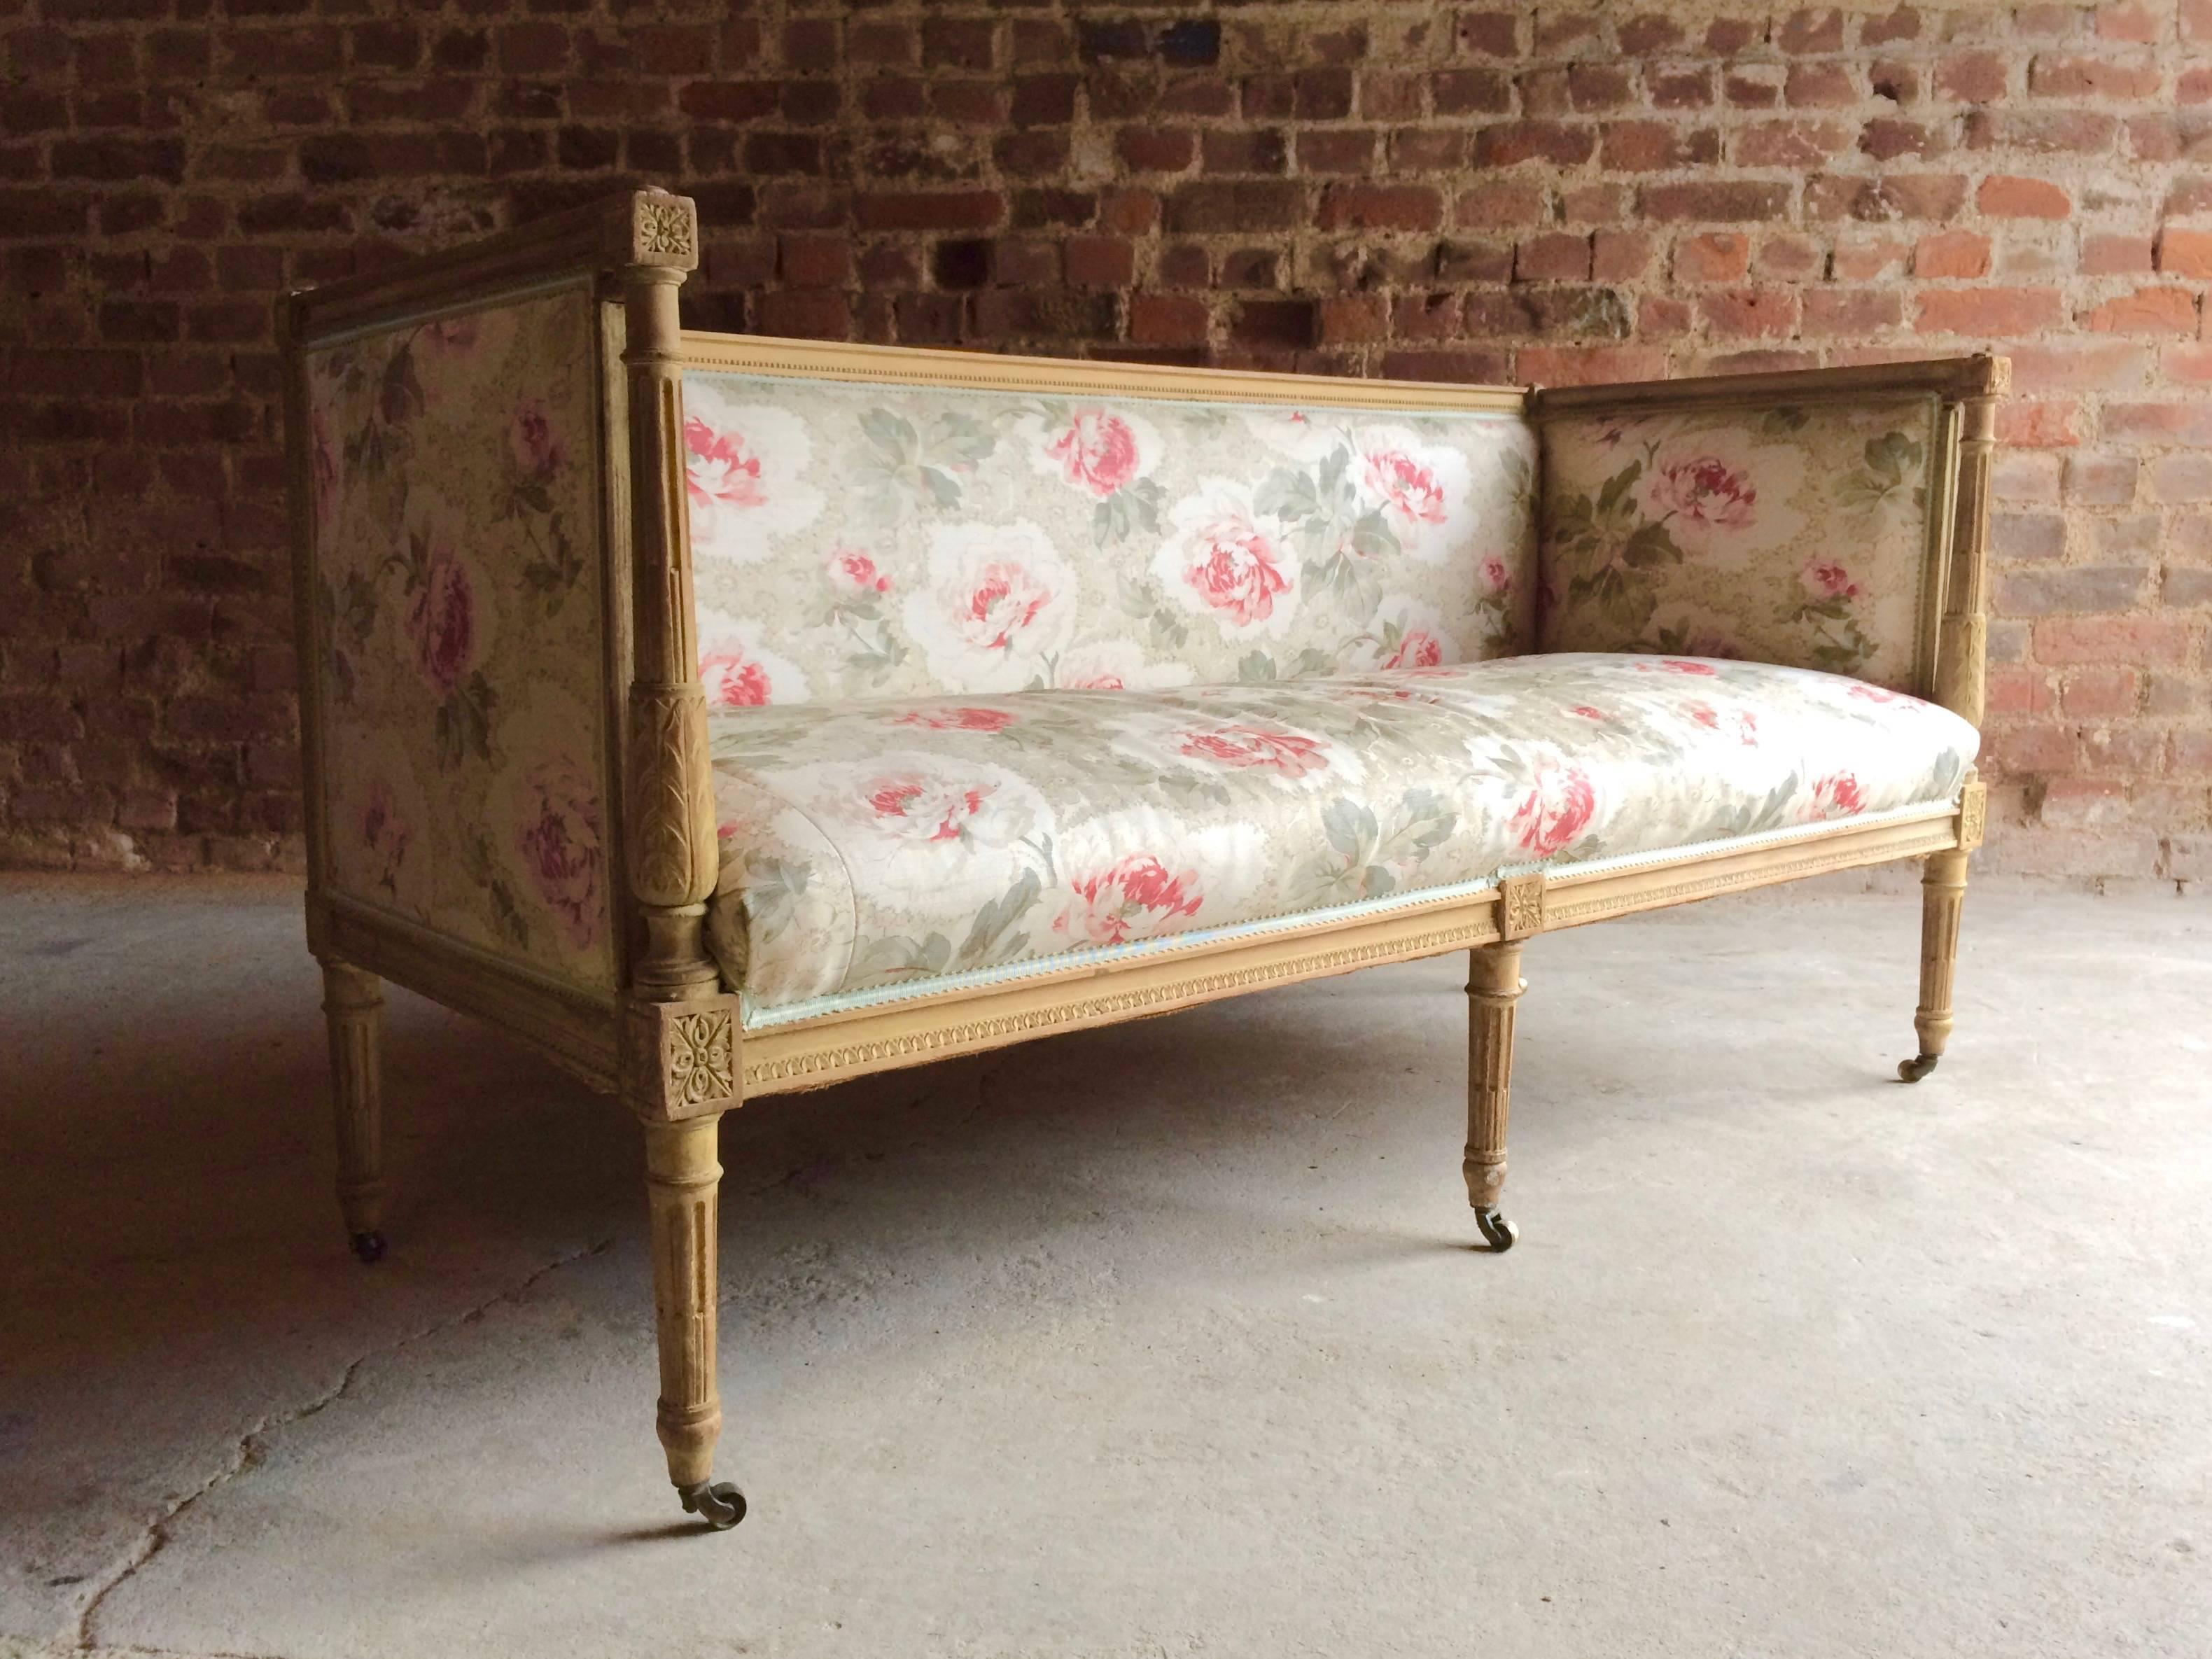 A magnificent 18th century French Louis XV beech framed salon sofa settee circa 1770, with carved and fluted outset pilaster columns to the front and turned tapering legs terminating in brass casters, upholstered in Bennison fabric, the sofa is